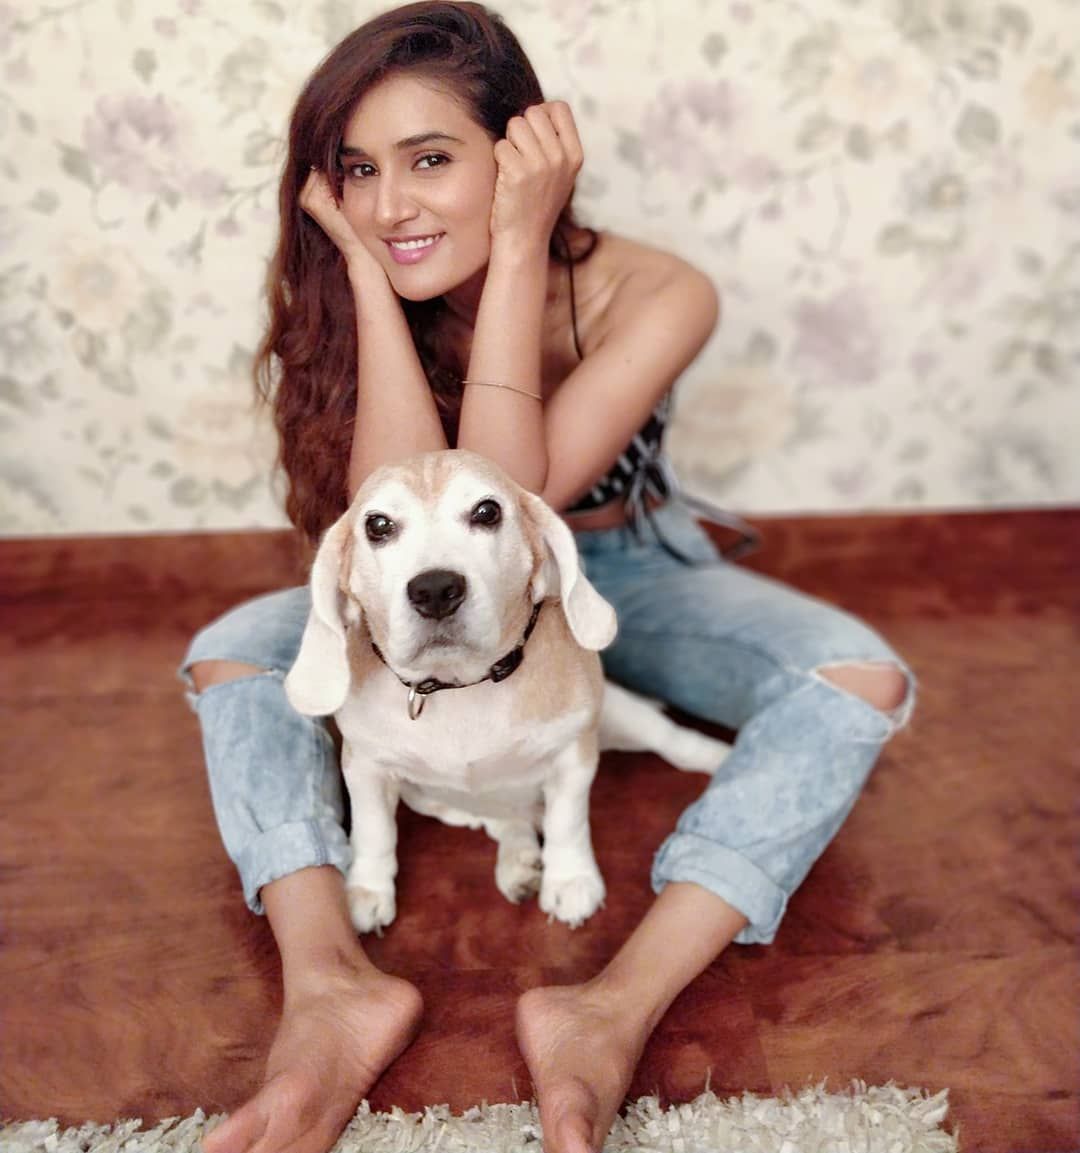 Mukti Mohan with her pet dog, Frodo